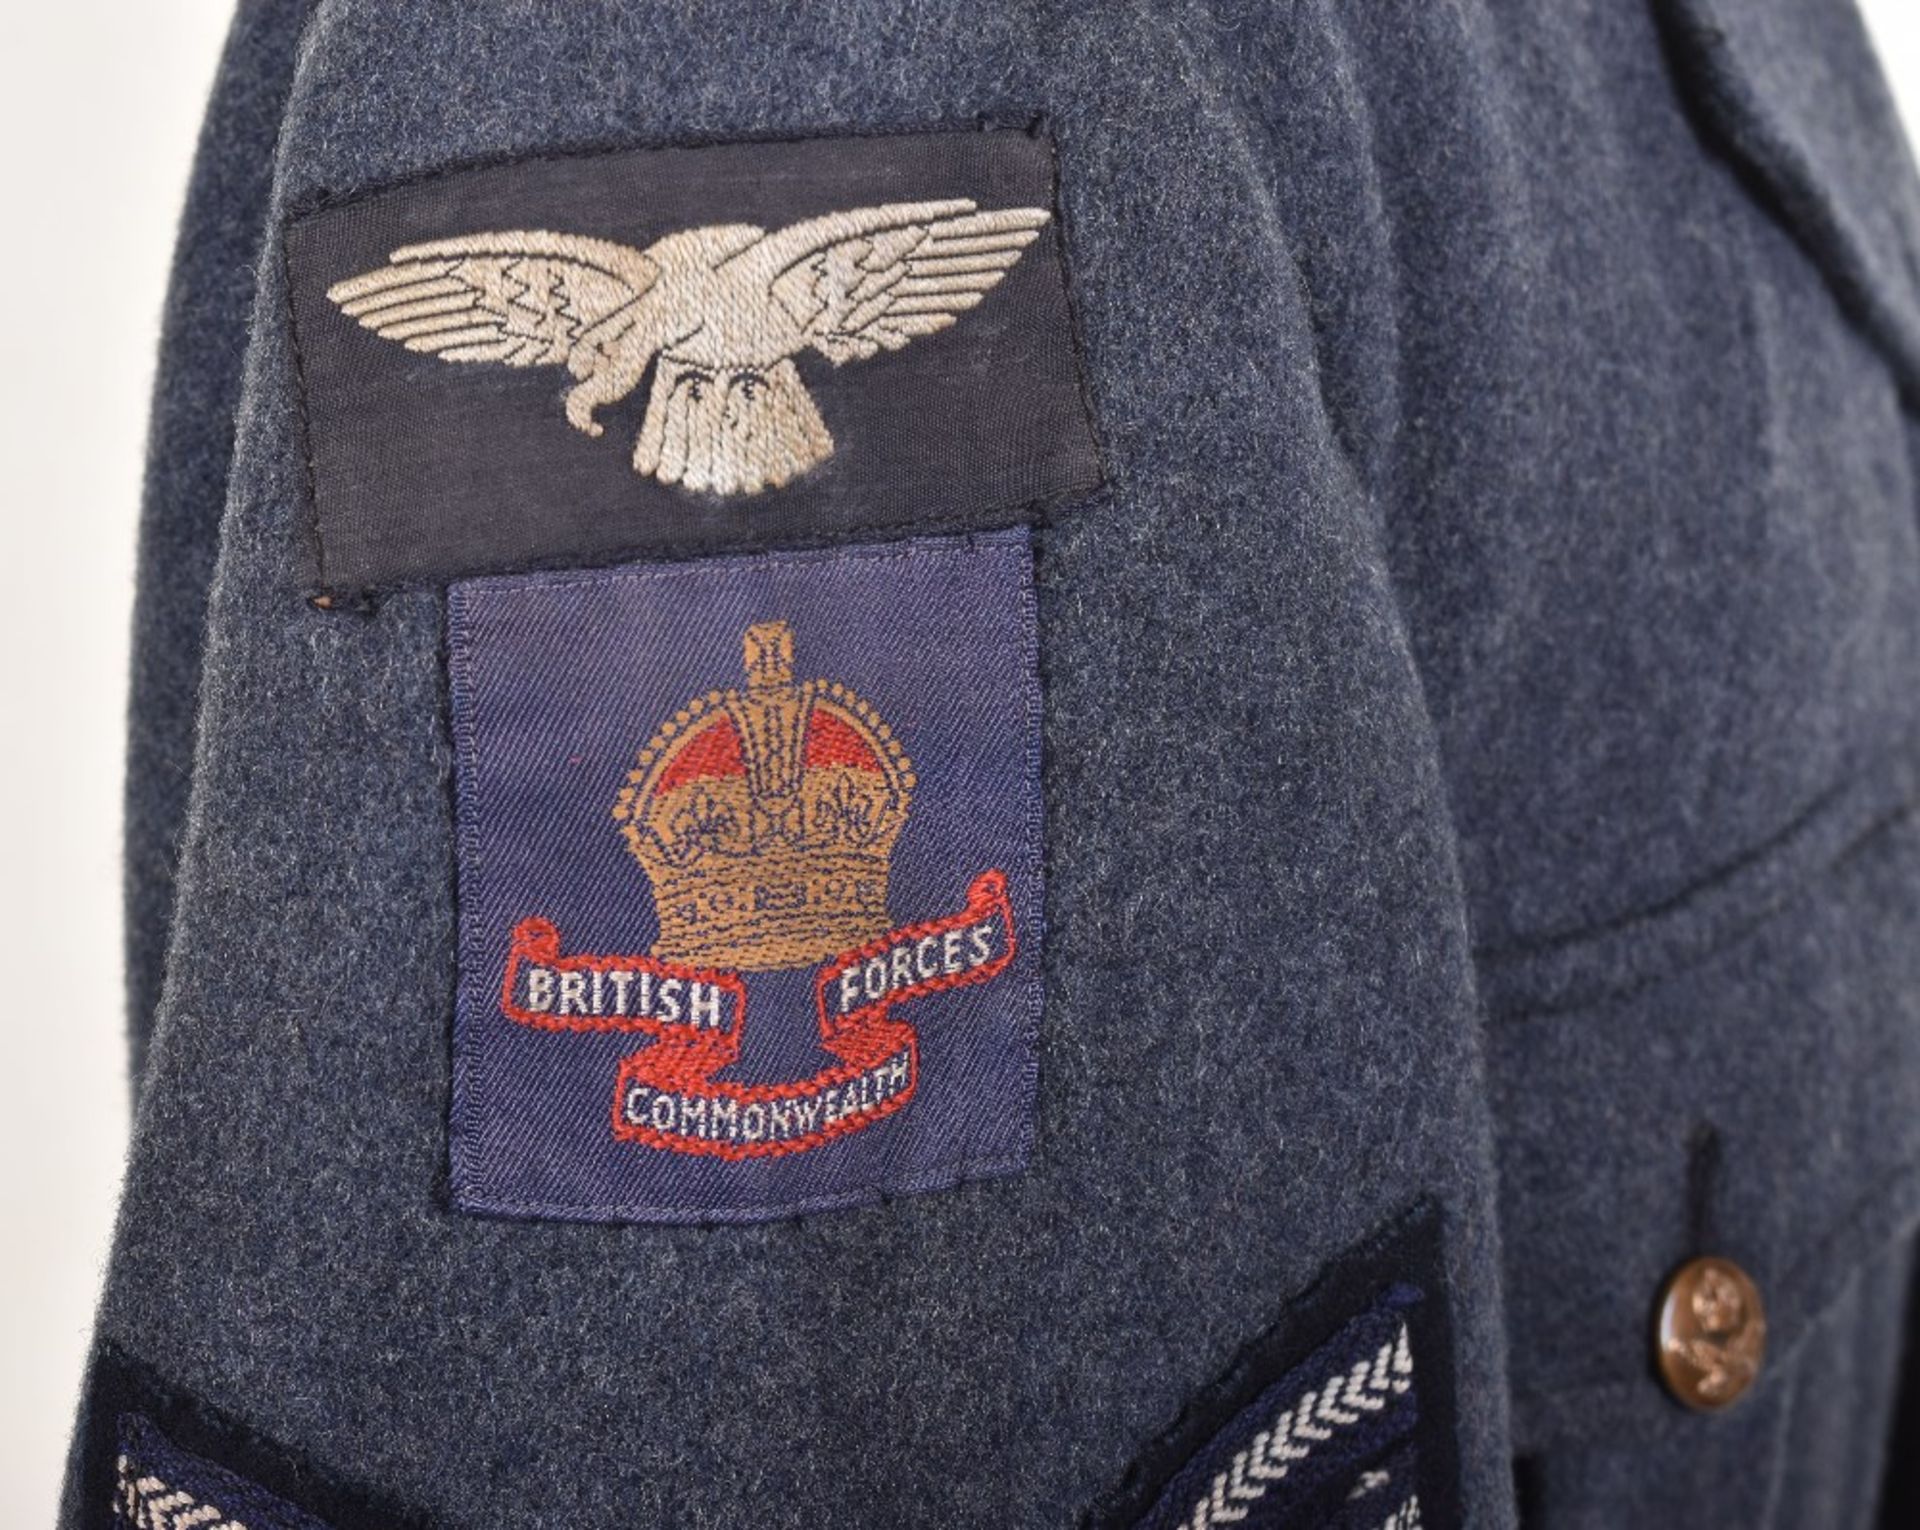 Scarce Royal Air Force Other Ranks Tunic with Insignia for British Commonwealth Occupation Force Jap - Image 2 of 10